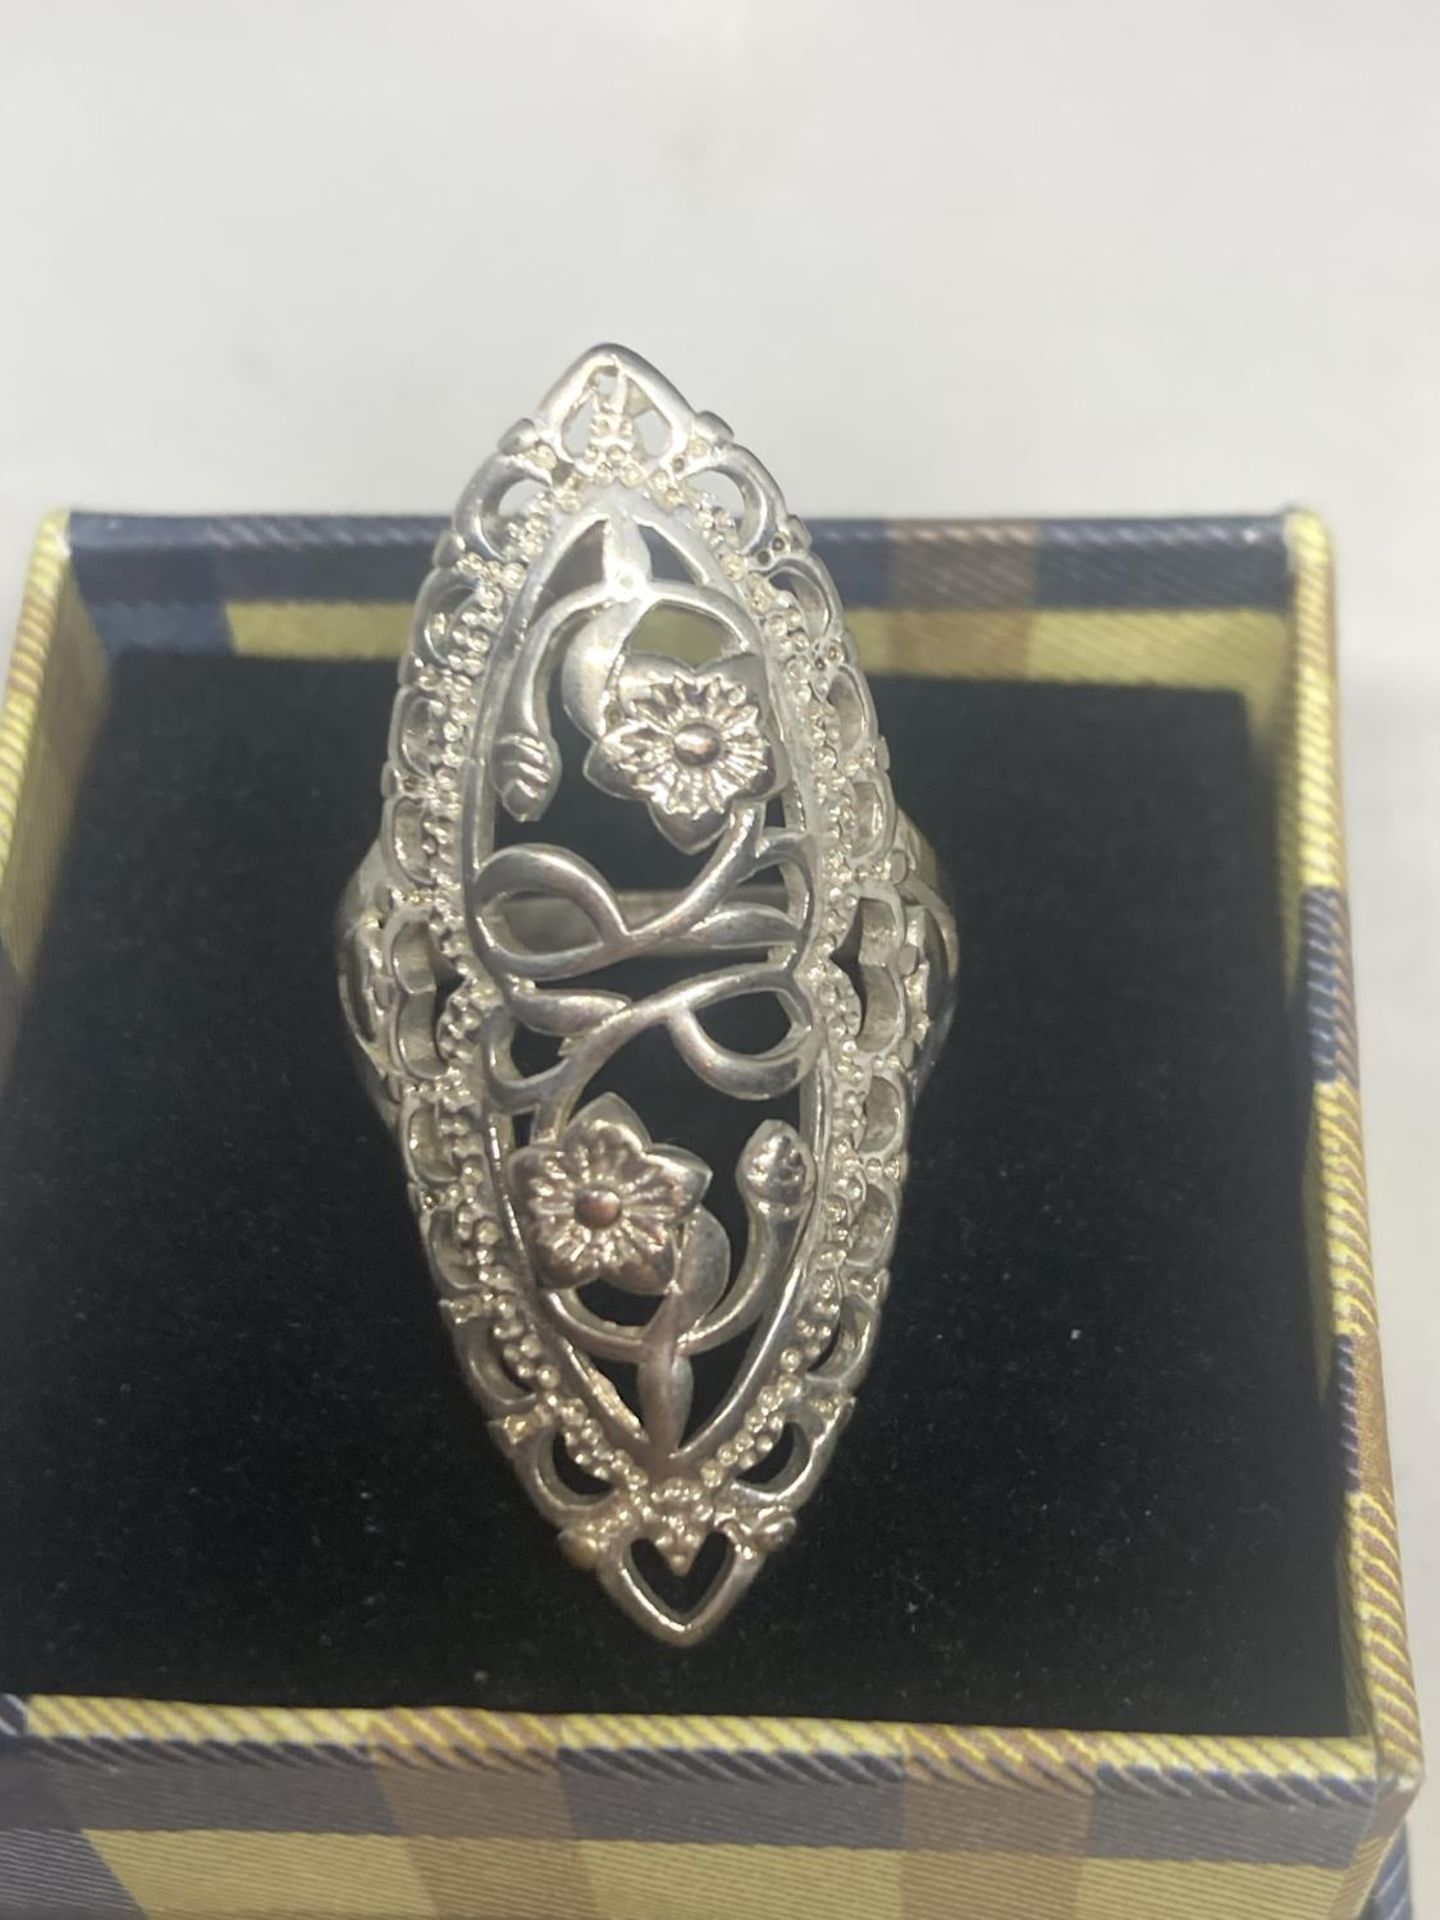 A MARKED 925 LARGE DECORATIVE FLORAL RING IN A PRESENTATION BOX - Image 4 of 6